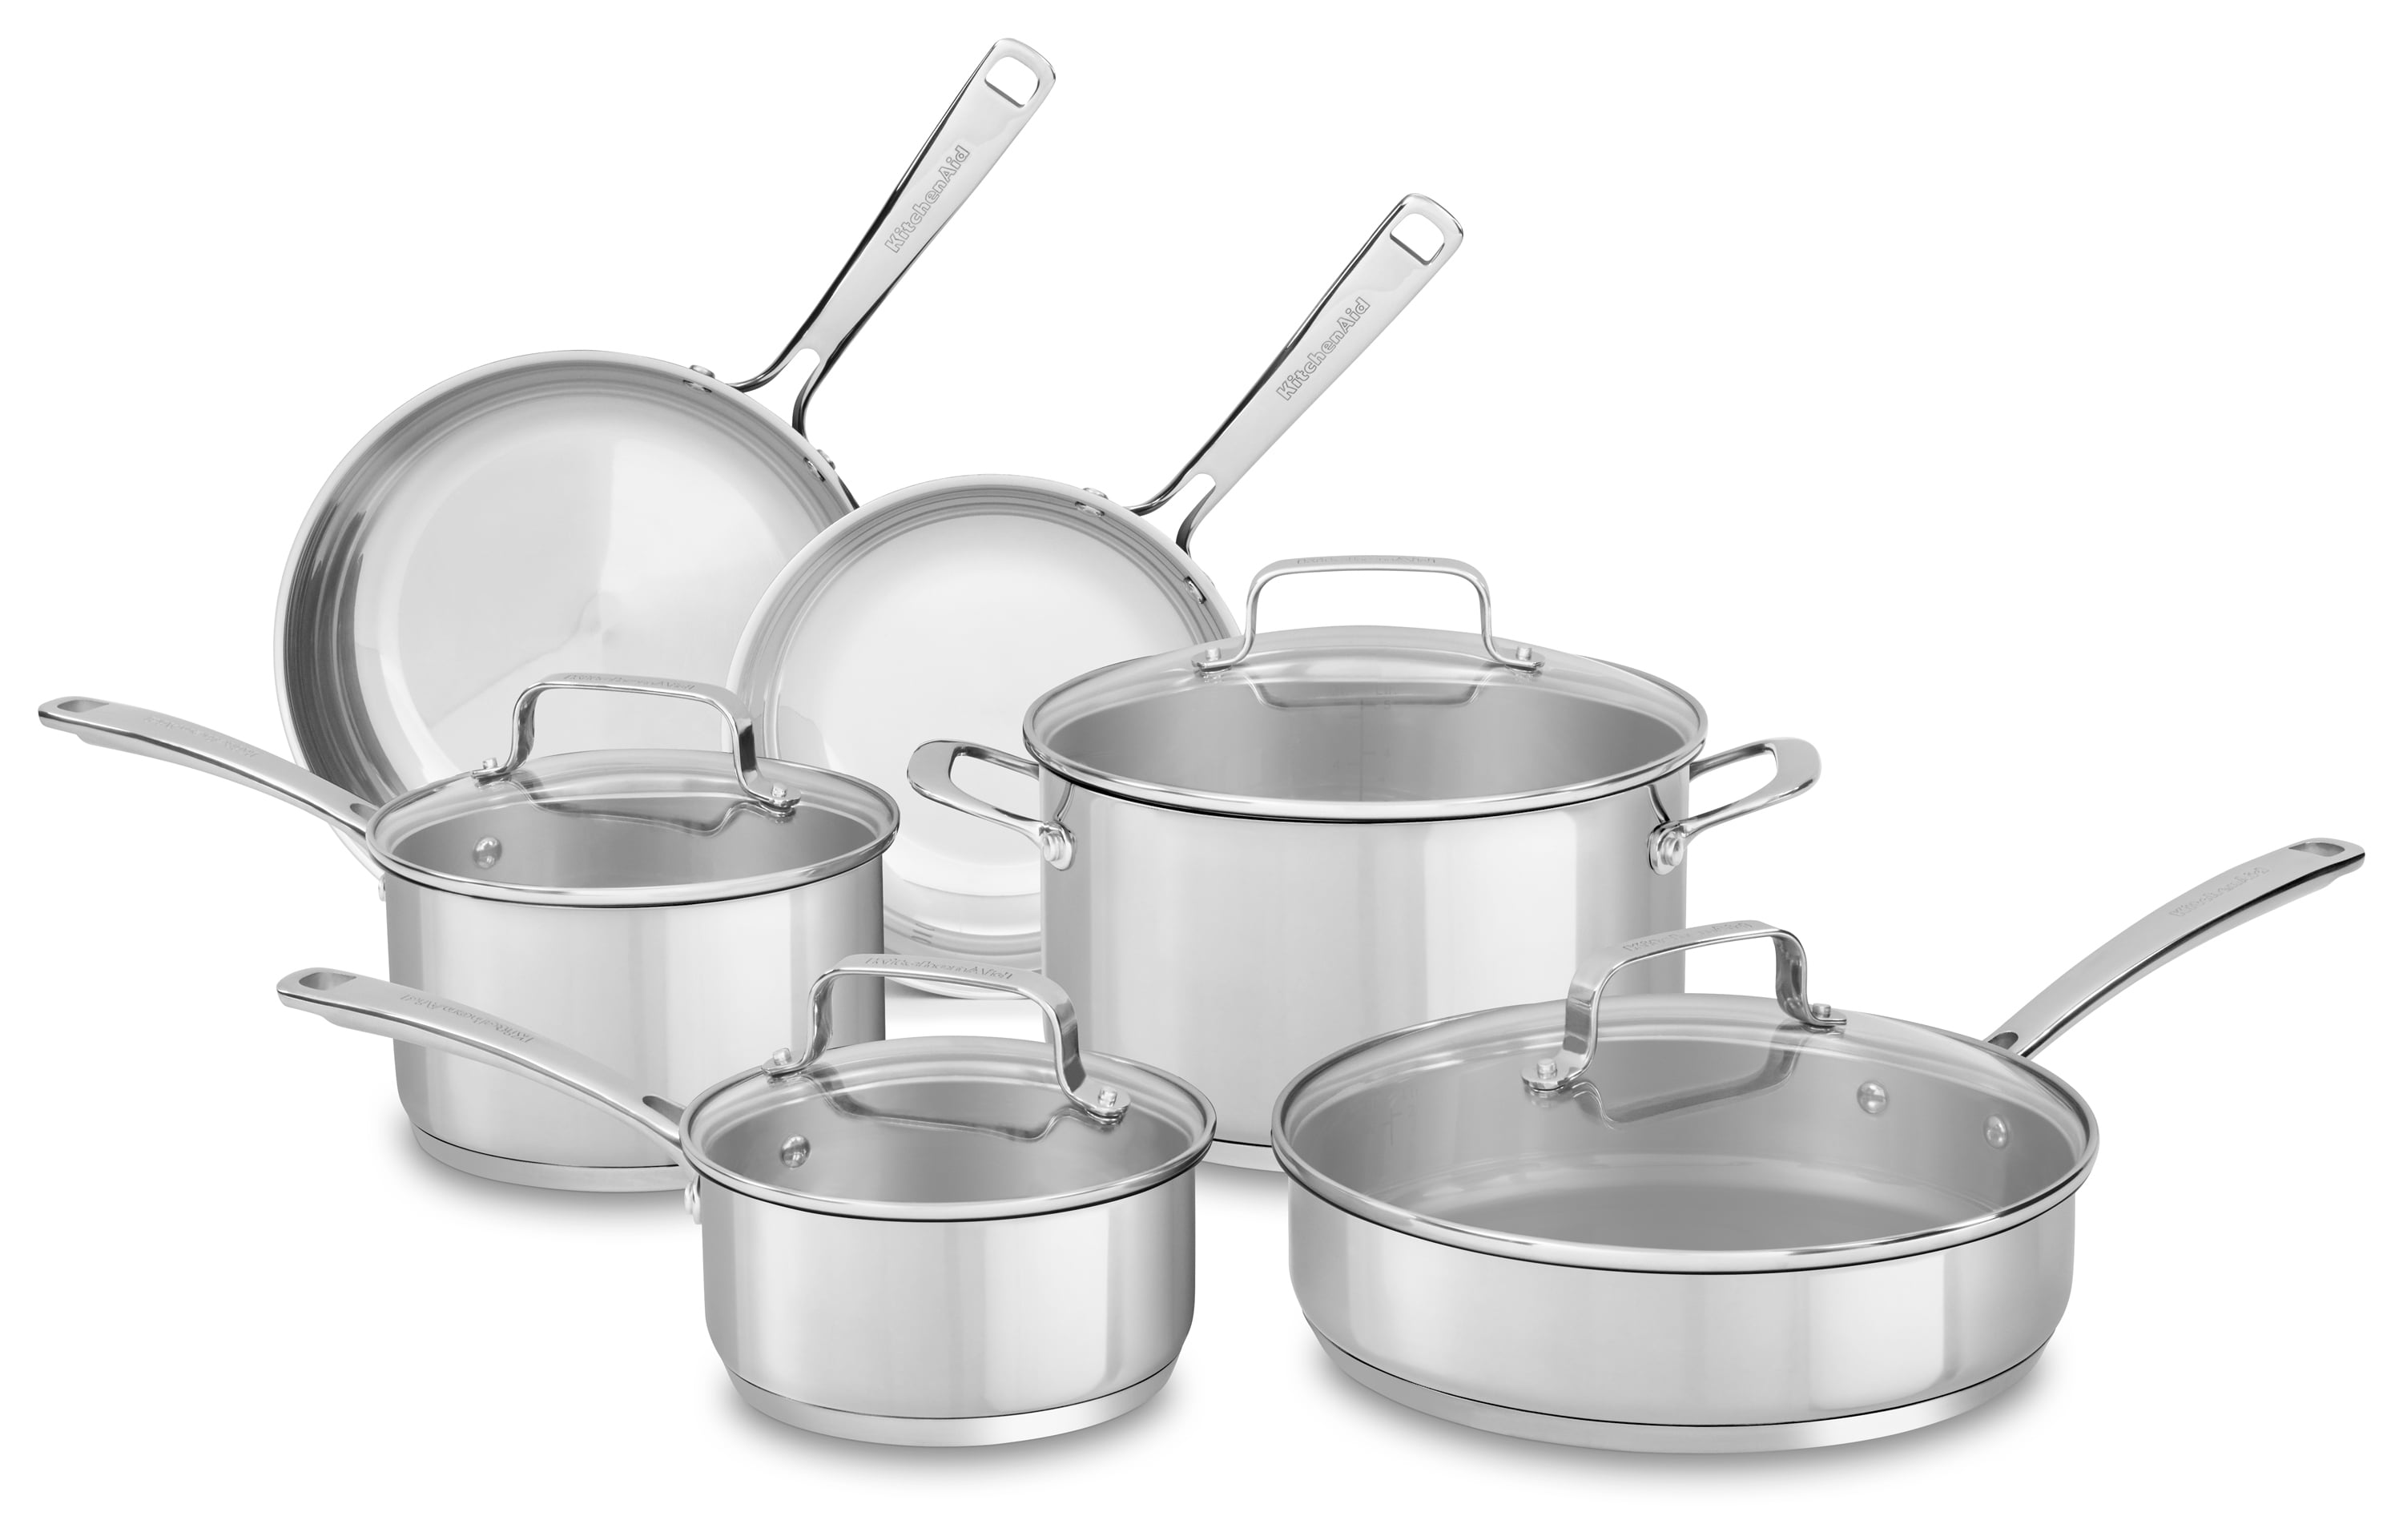 KitchenAid Stainless Steel Cookware Pots and Pans Set, 10 Piece, Brushed  Stainless Steel & Reviews